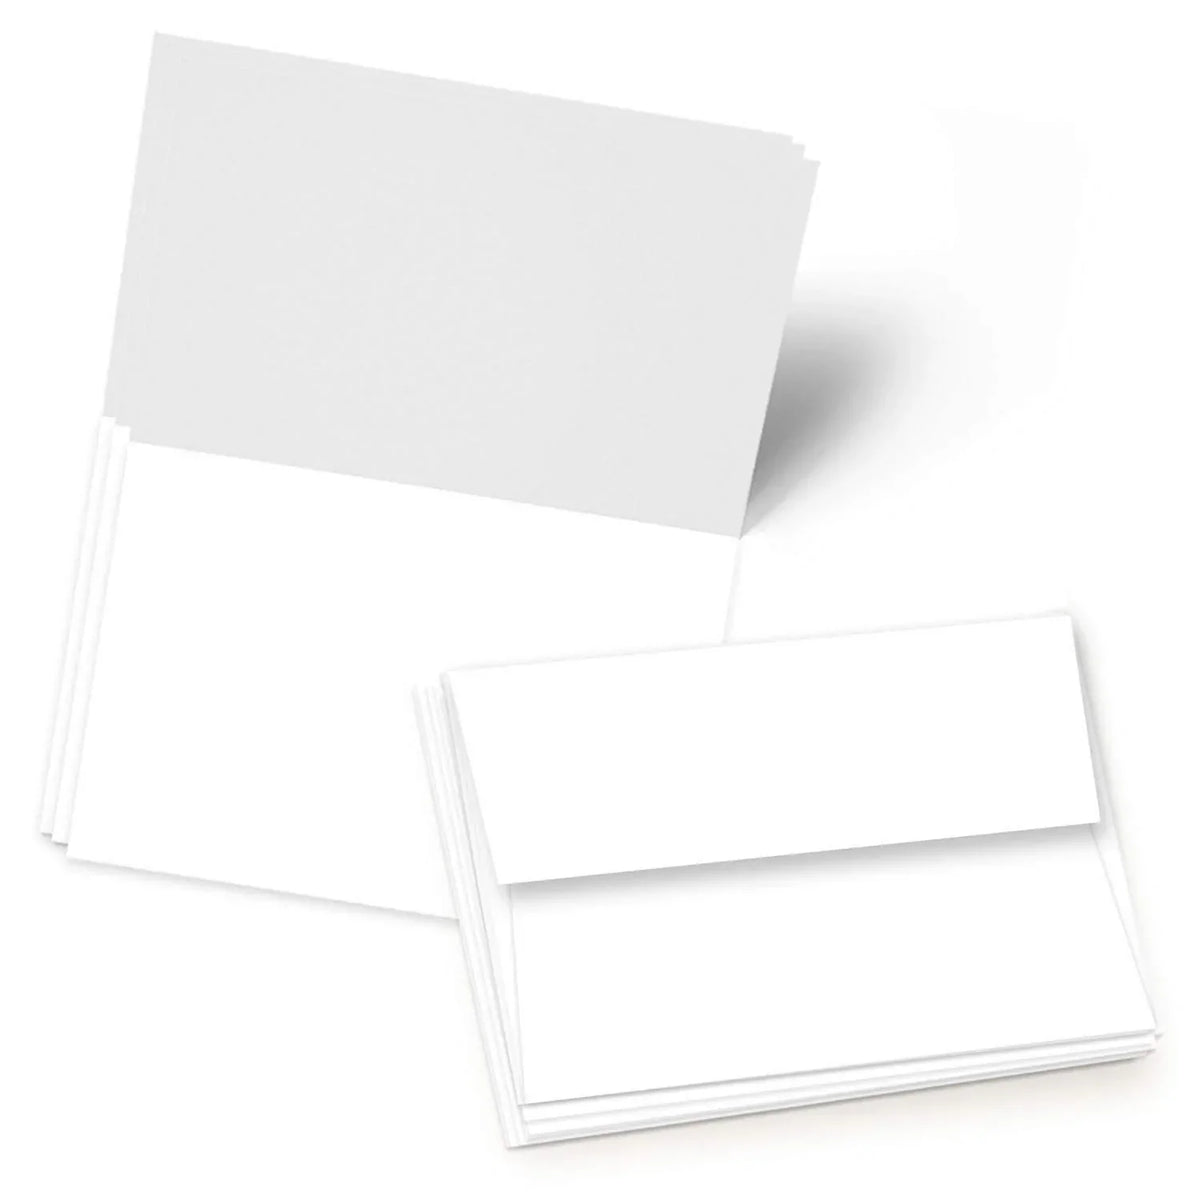 Blank Greeting Cards with Envelopes